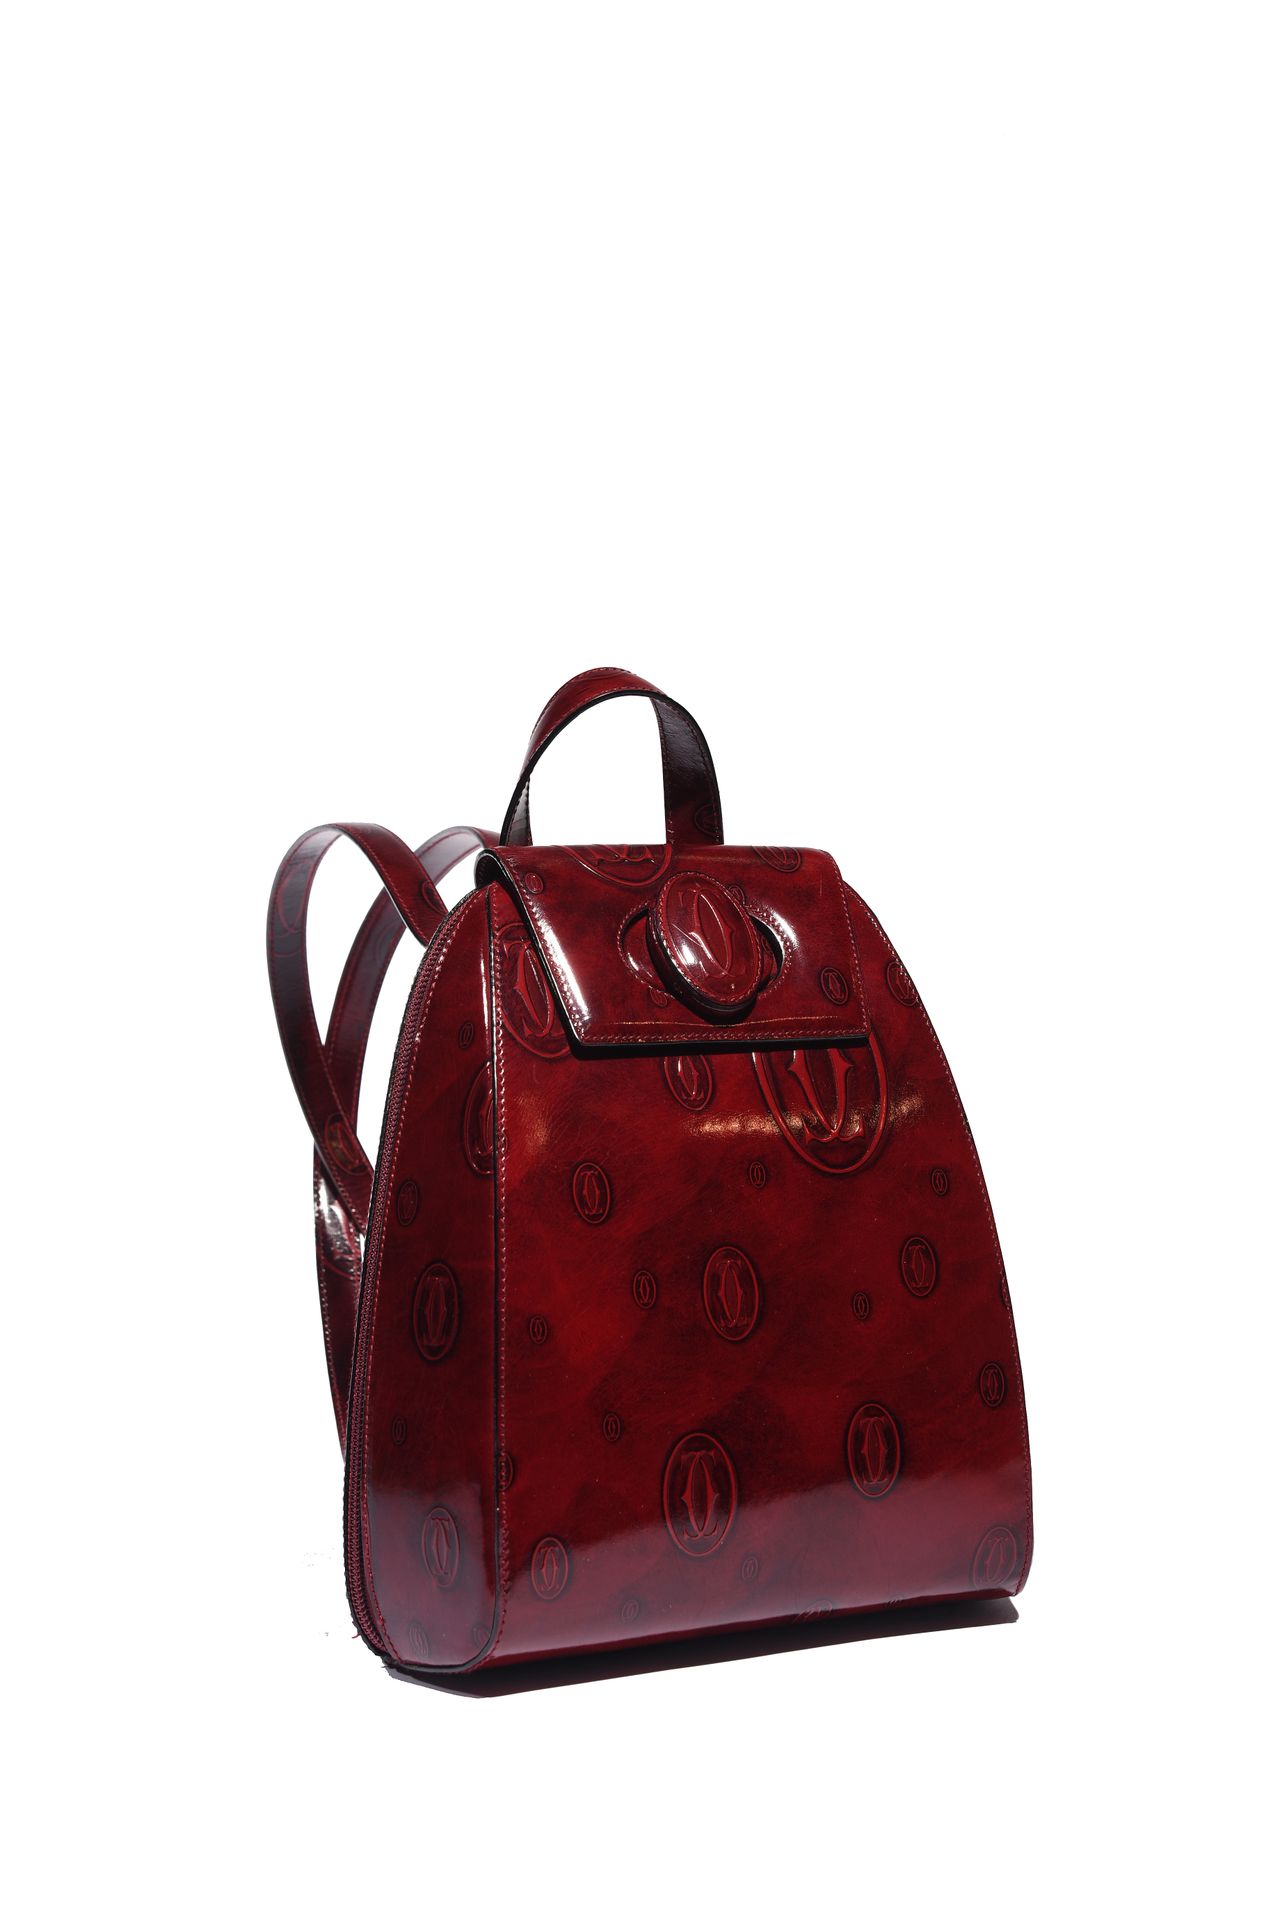 Null CARTIER

21 cm backpack in burgundy patent leather with logo, zipper and fl&hellip;